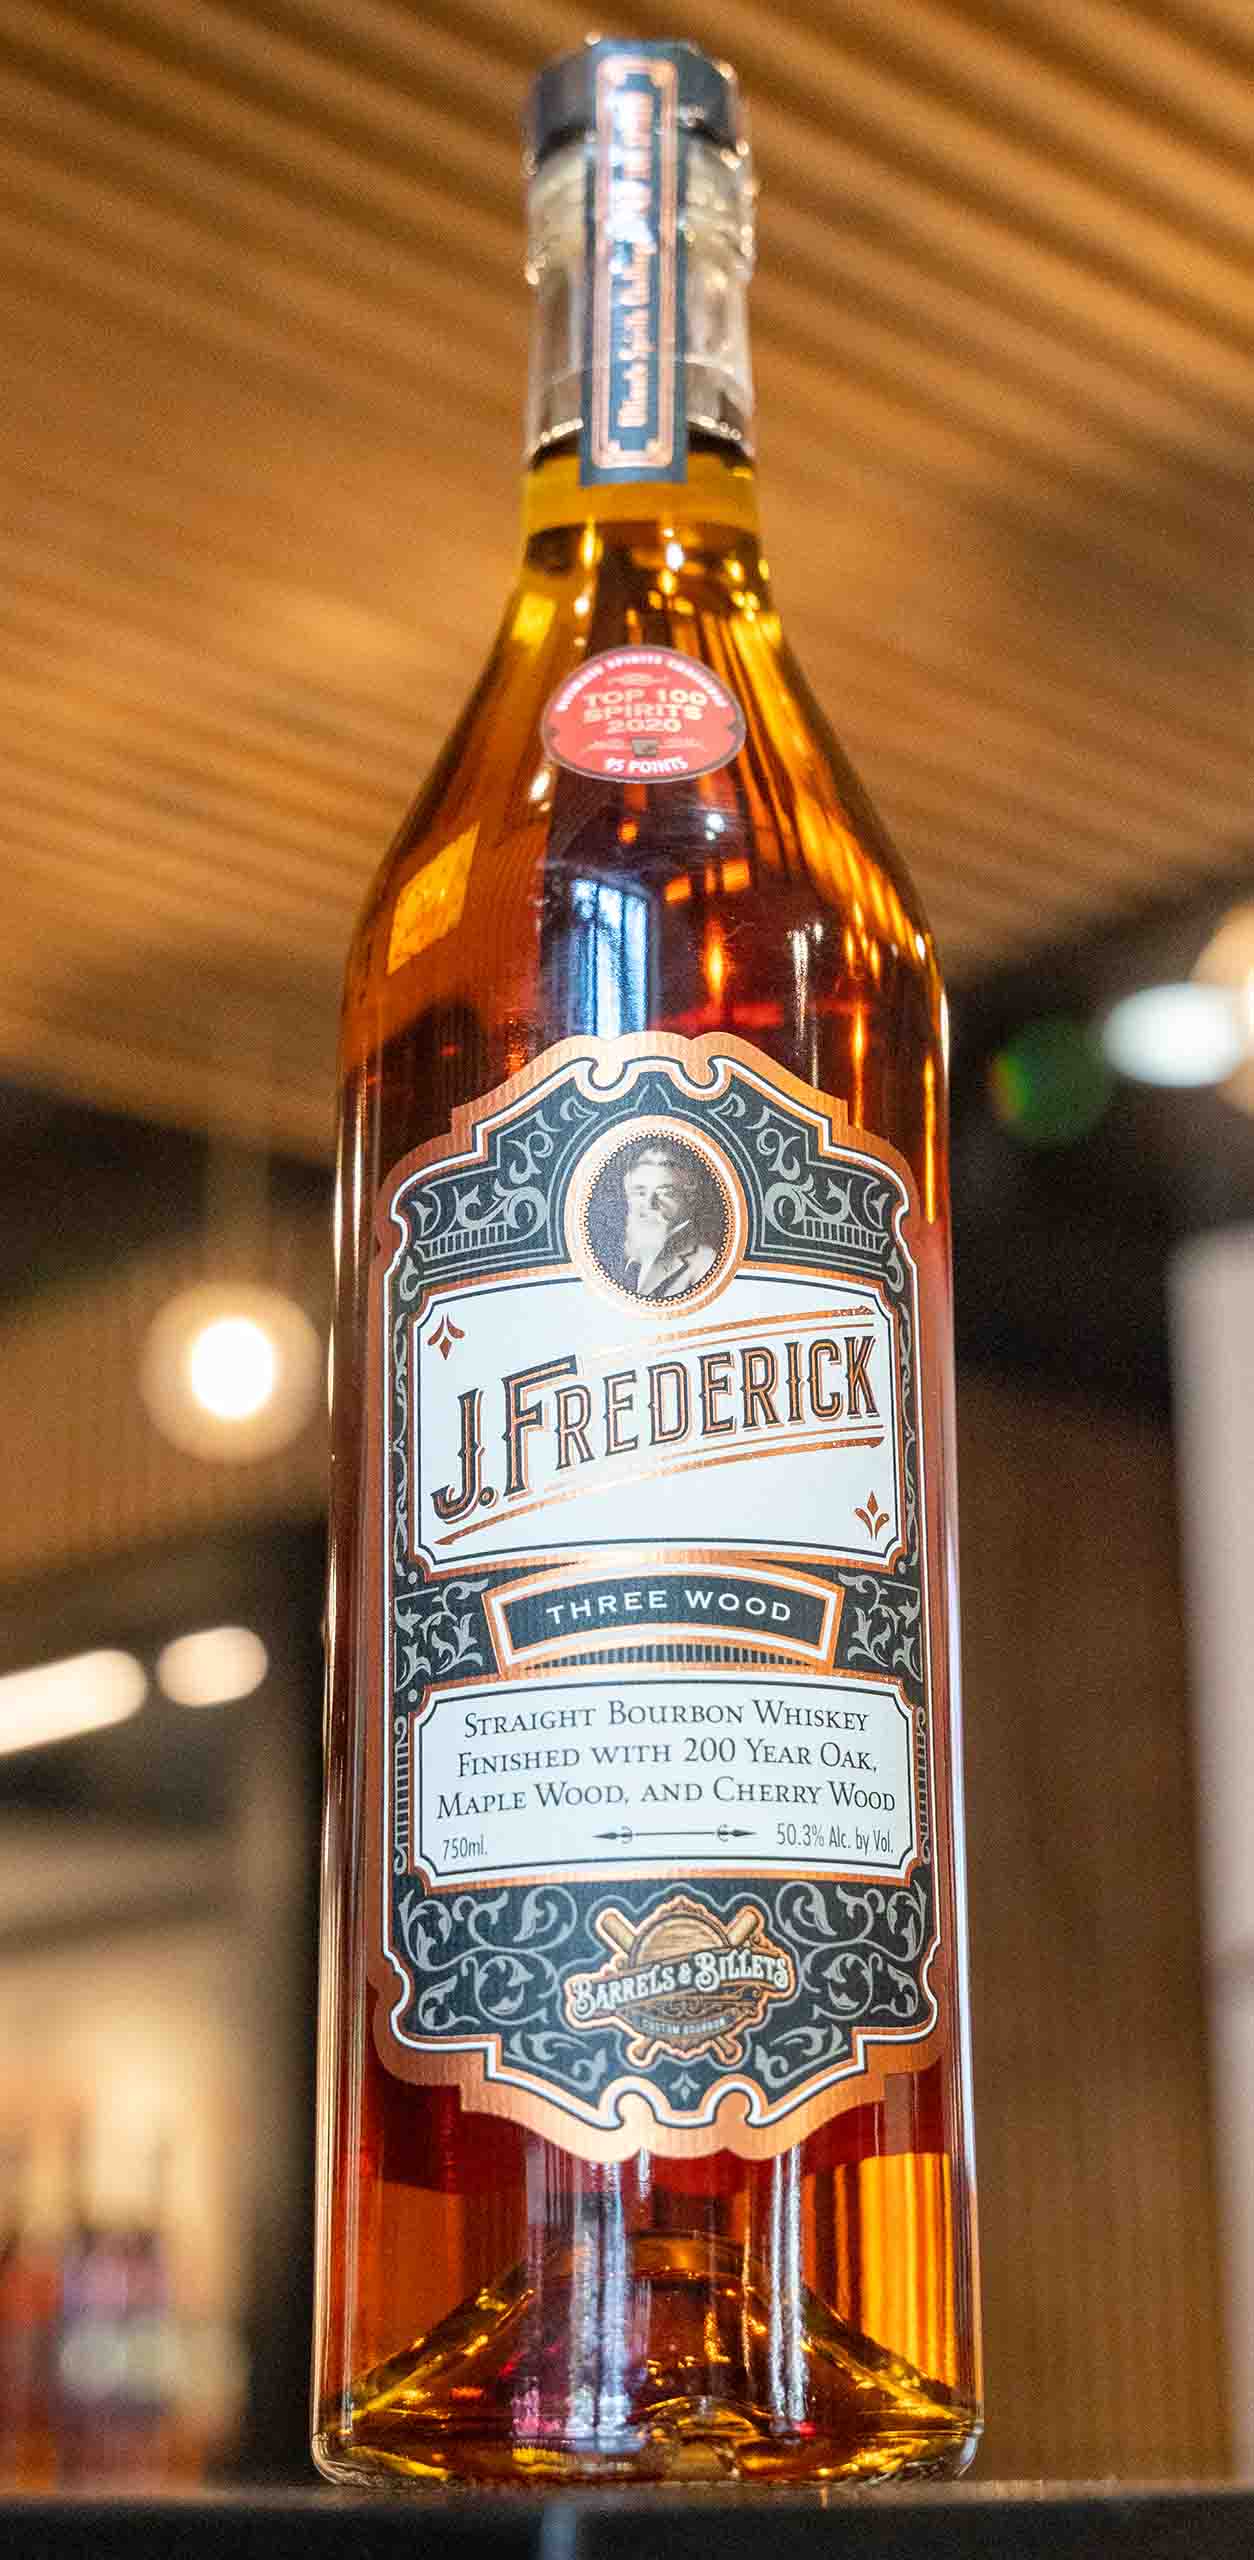 A bottle of our highly rated J. Frederick bourbon, which received 95 points at the 2020 Ultimate Spirits Challenge.